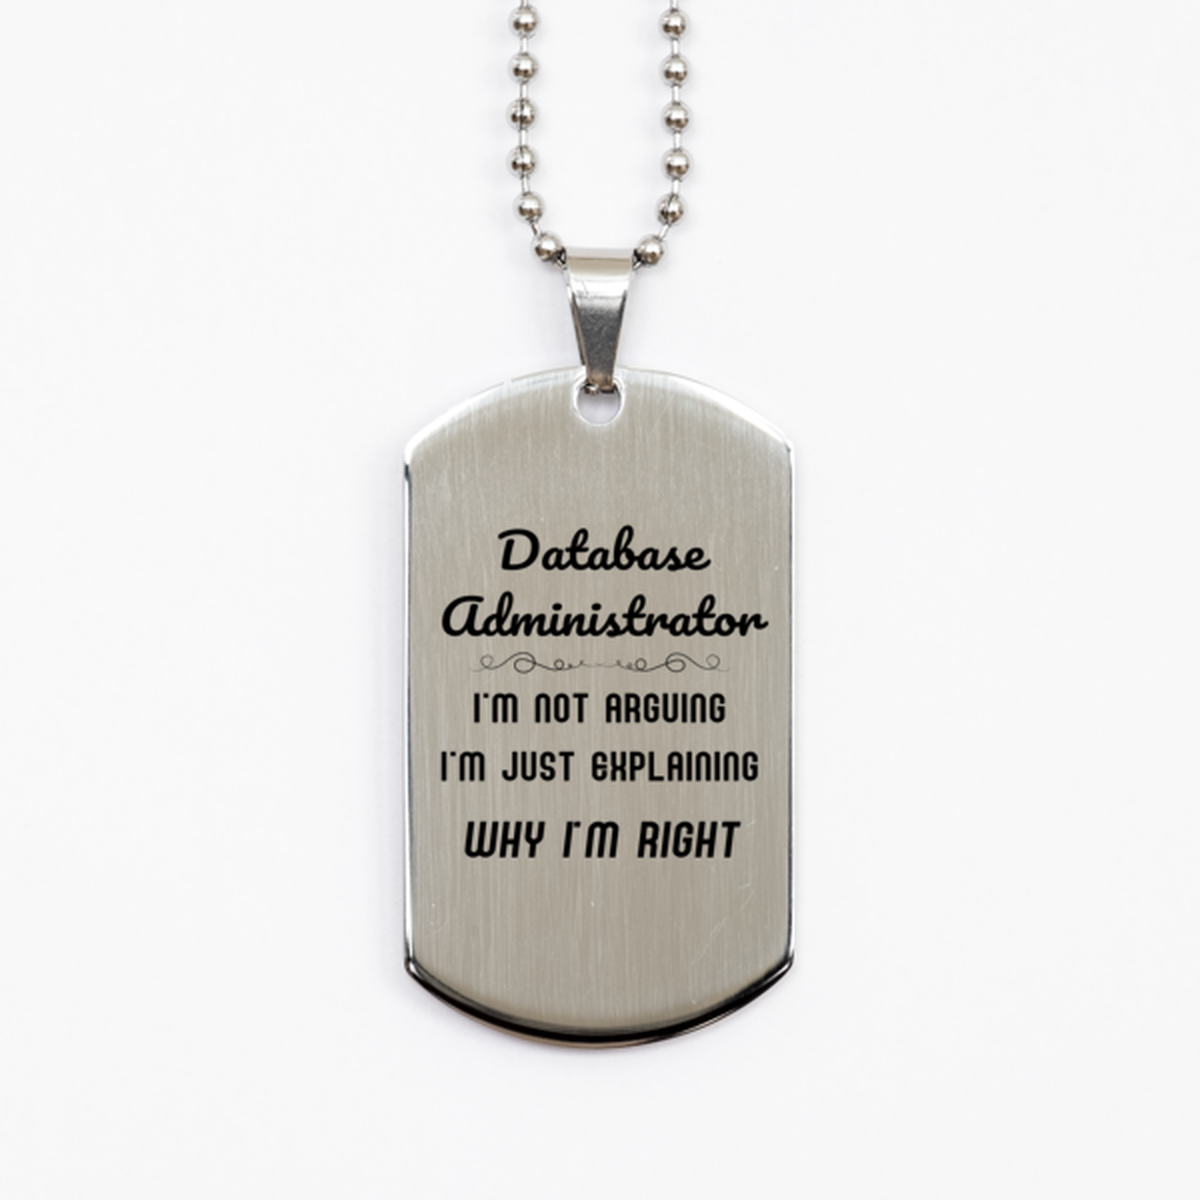 Database Administrator I'm not Arguing. I'm Just Explaining Why I'm RIGHT Silver Dog Tag, Funny Saying Quote Database Administrator Gifts For Database Administrator Graduation Birthday Christmas Gifts for Men Women Coworker